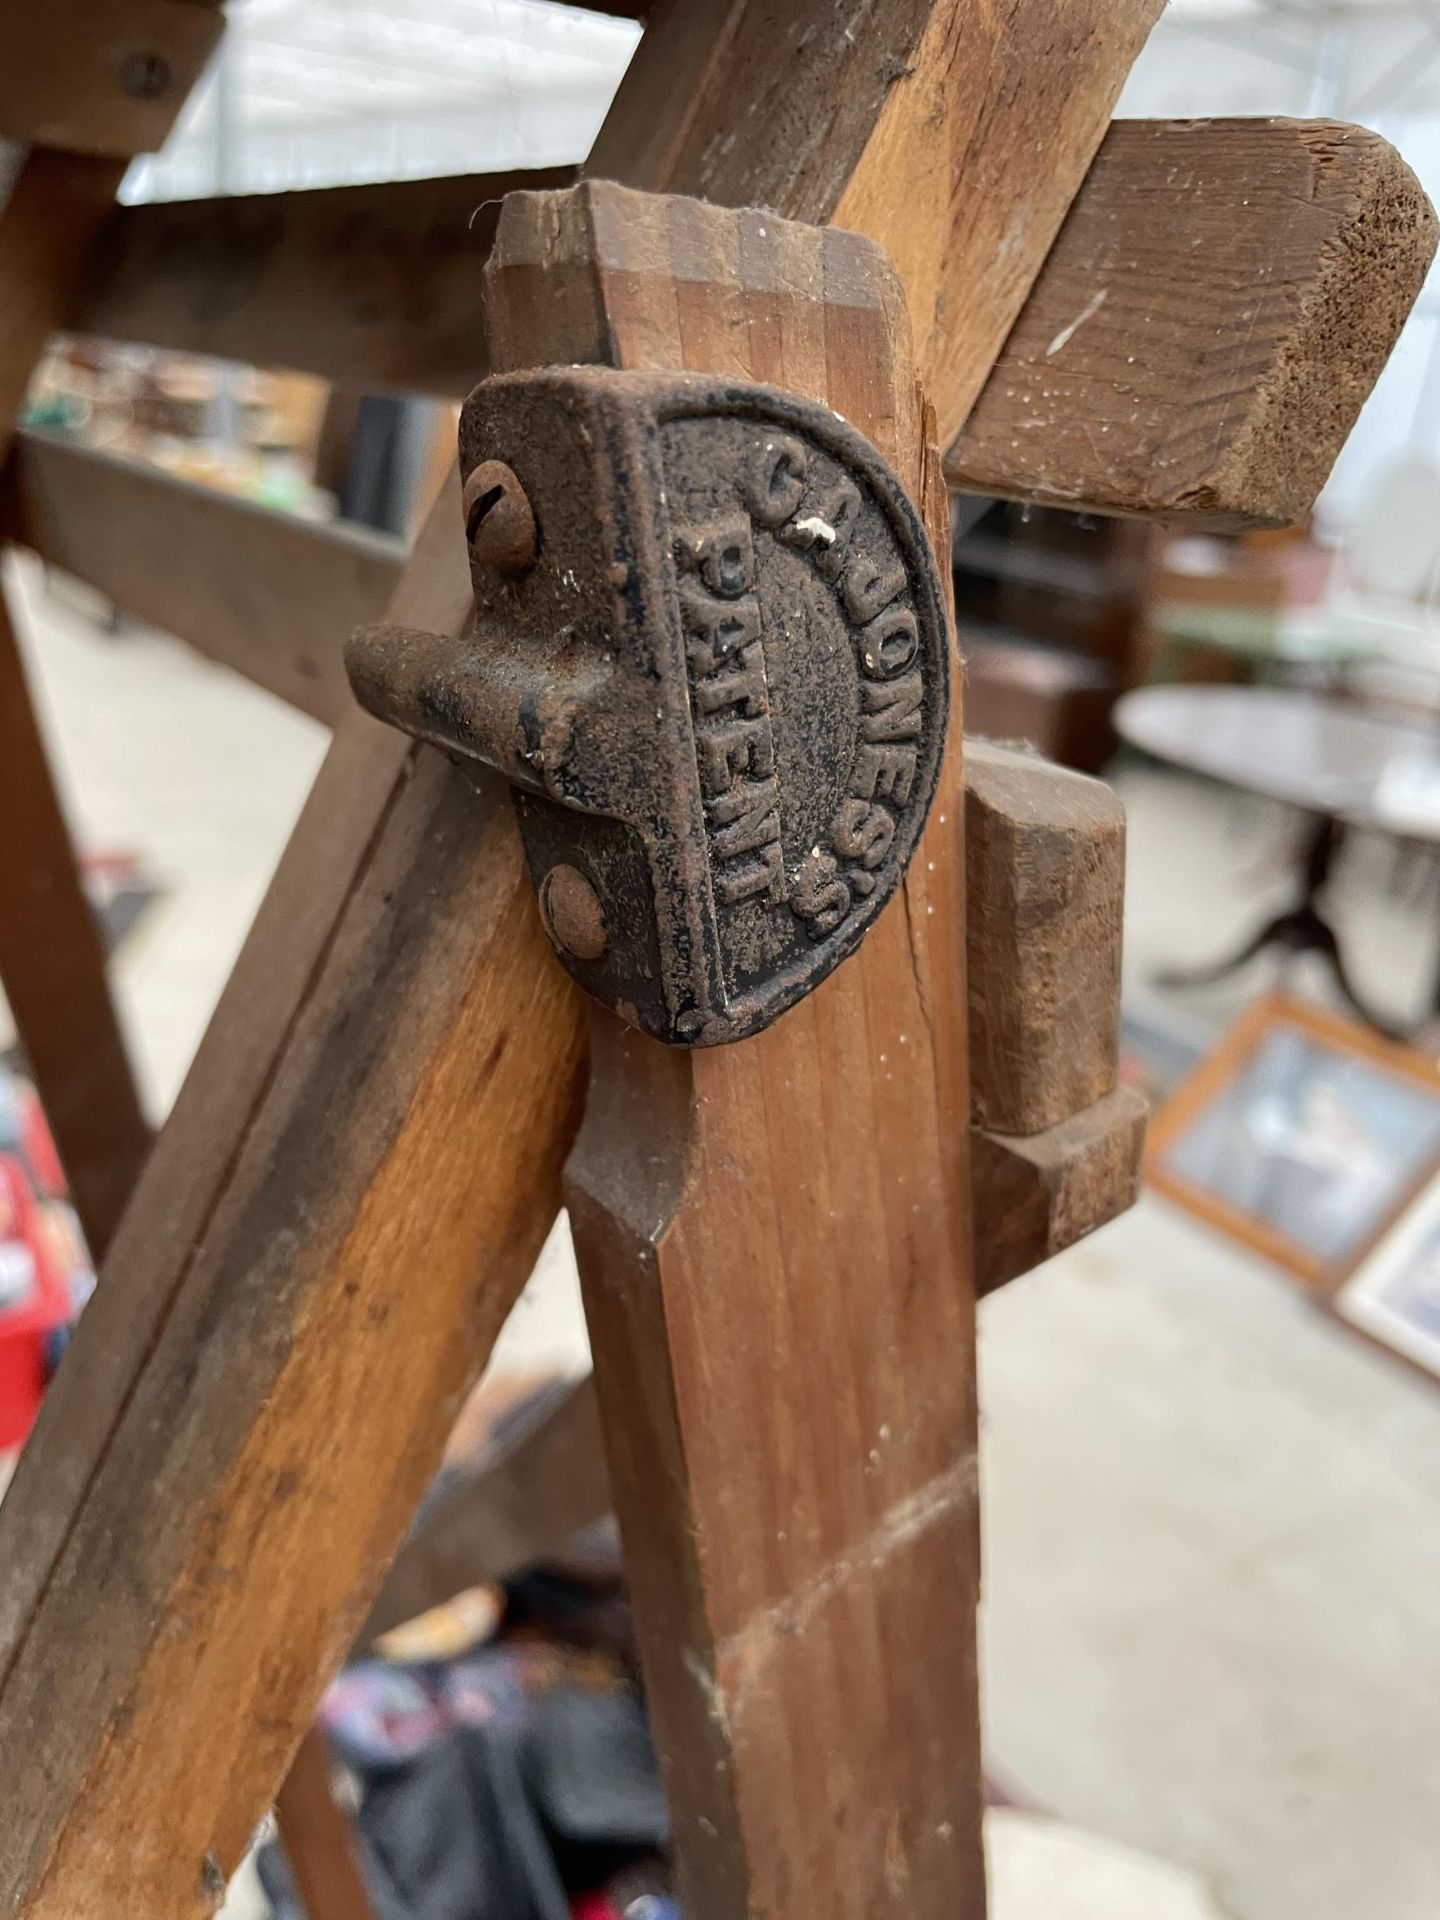 A SET OF VINTAGE WOODEN STEP LADDERS WITH CAST IRON FITTINGS - Image 2 of 2